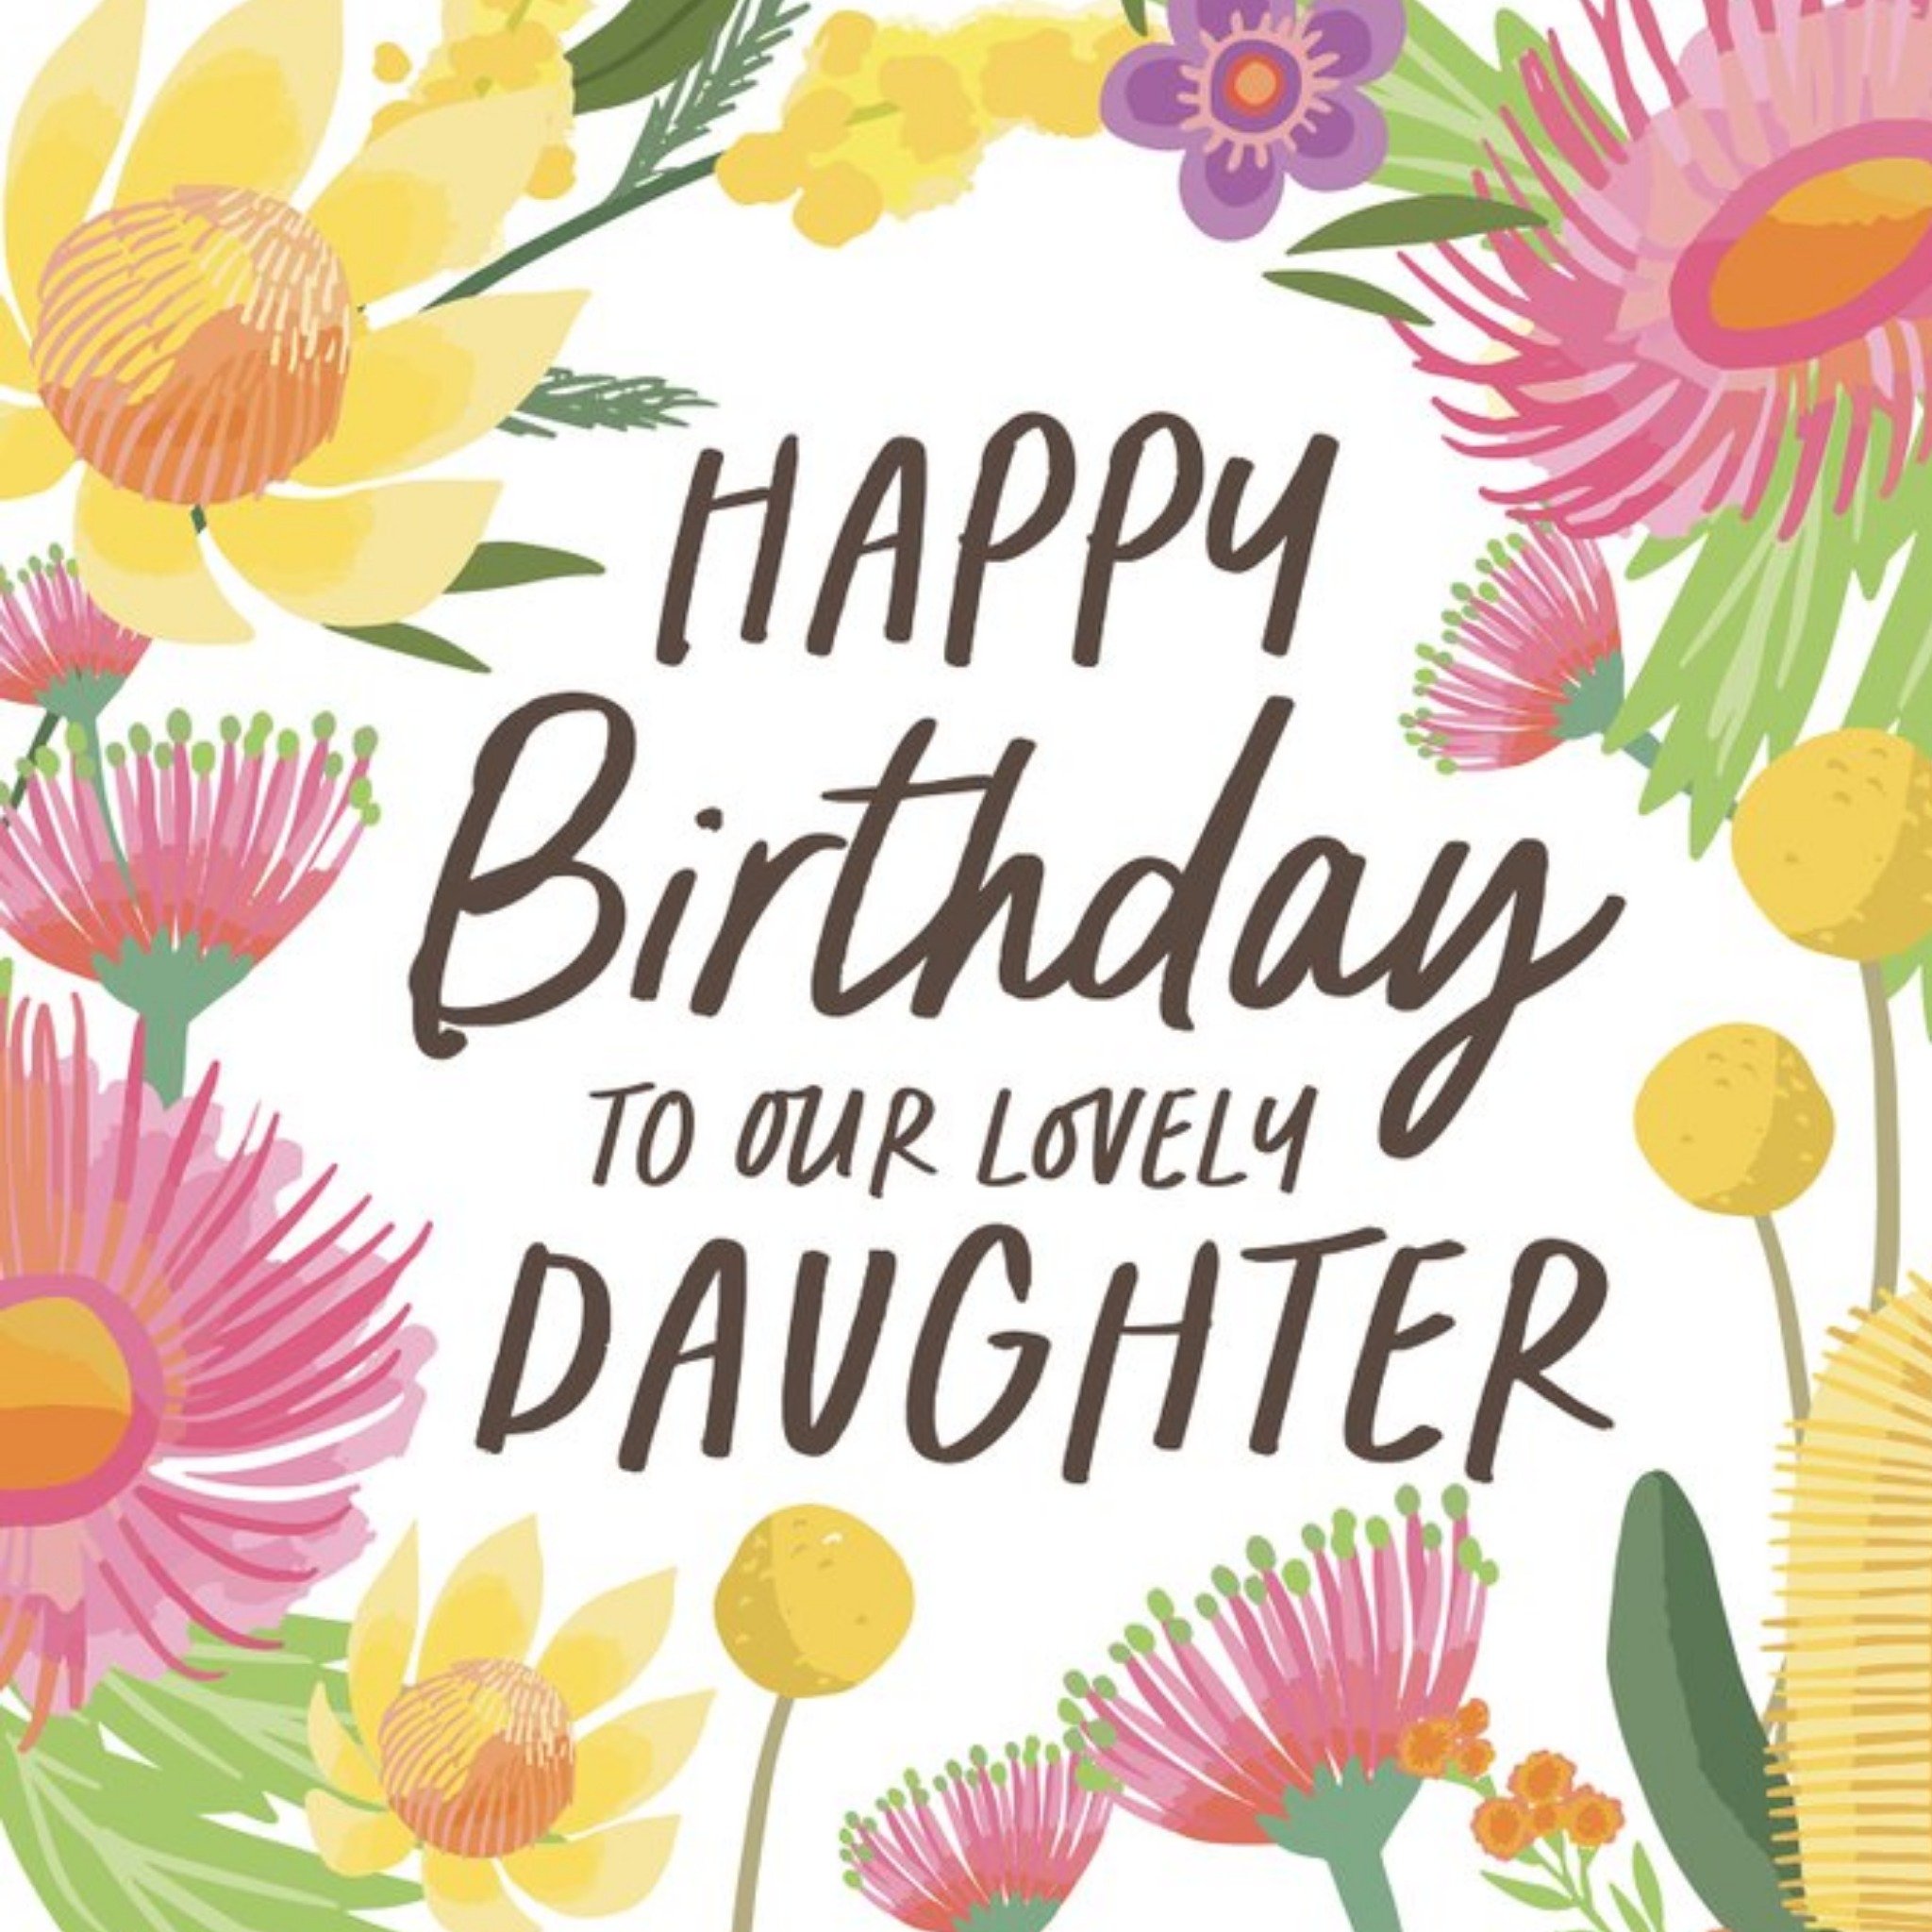 Moonpig Christie Williams Typographic Illustrated Floral Daughter Birthday Card, Square